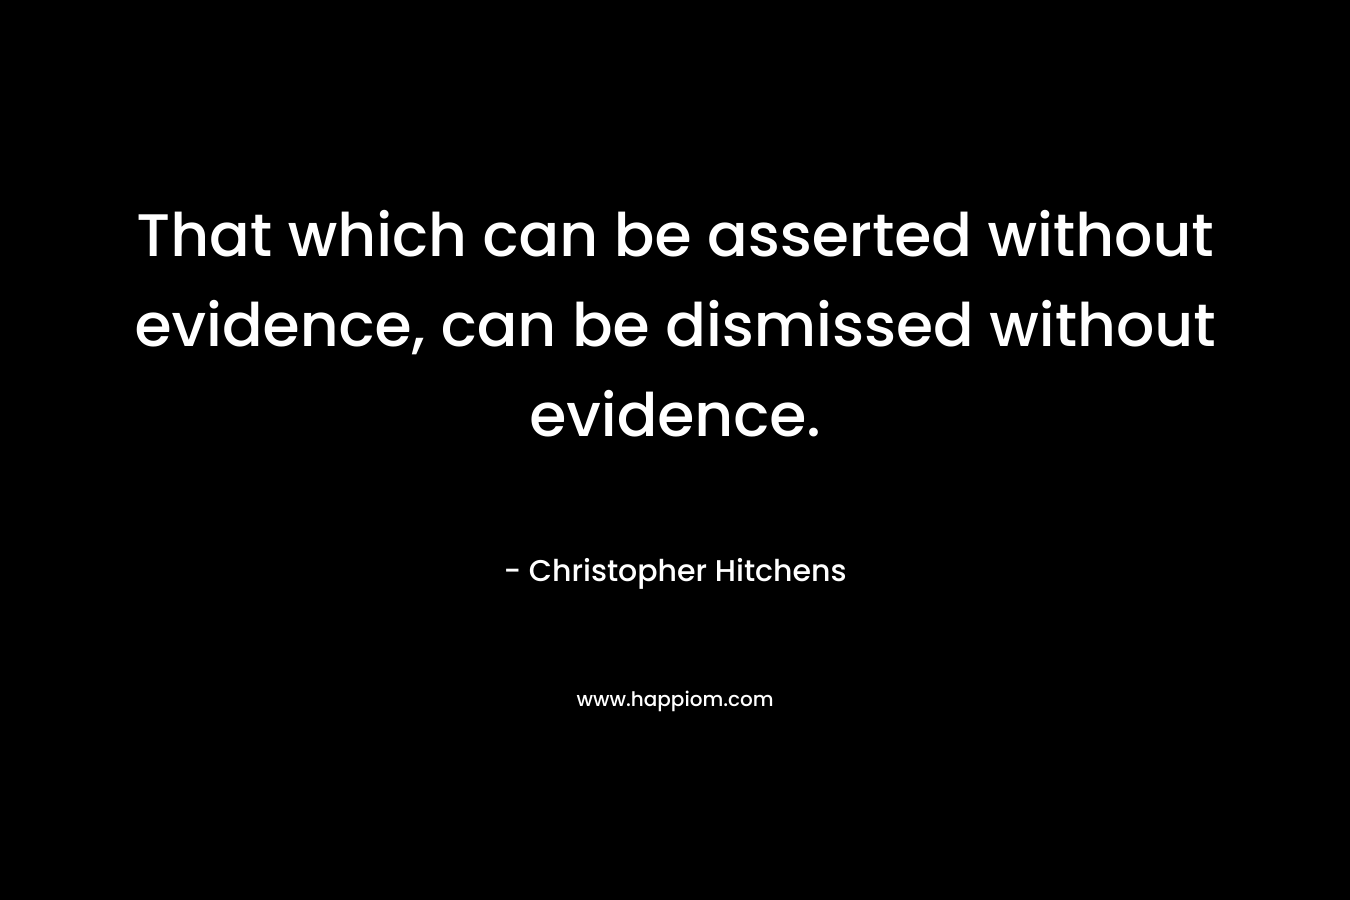 That which can be asserted without evidence, can be dismissed without evidence.